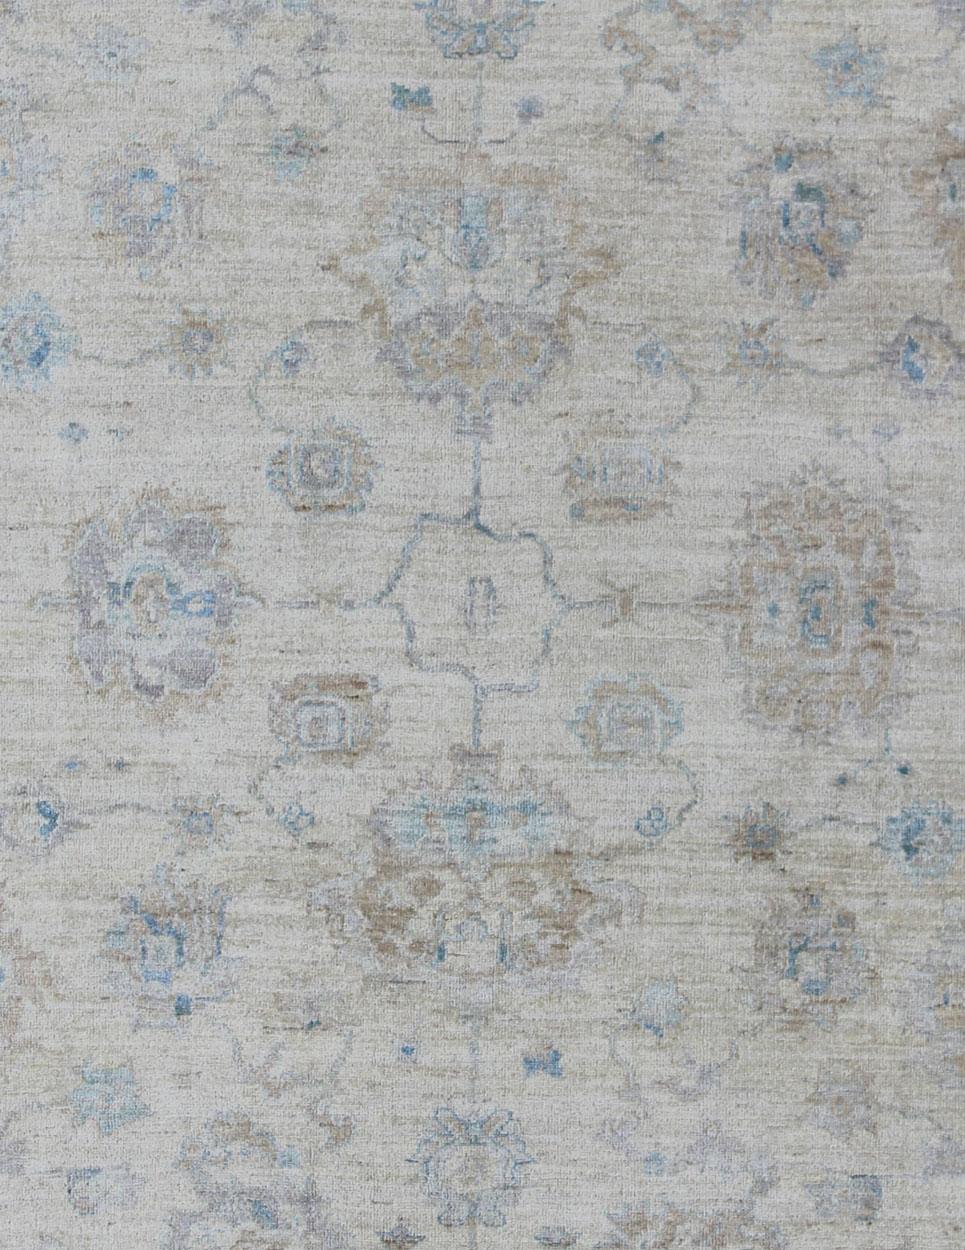 Angora Oushak Turkish Rug in Cream, Taupe, Silver, Light Brown Light Blue Colors In New Condition For Sale In Atlanta, GA